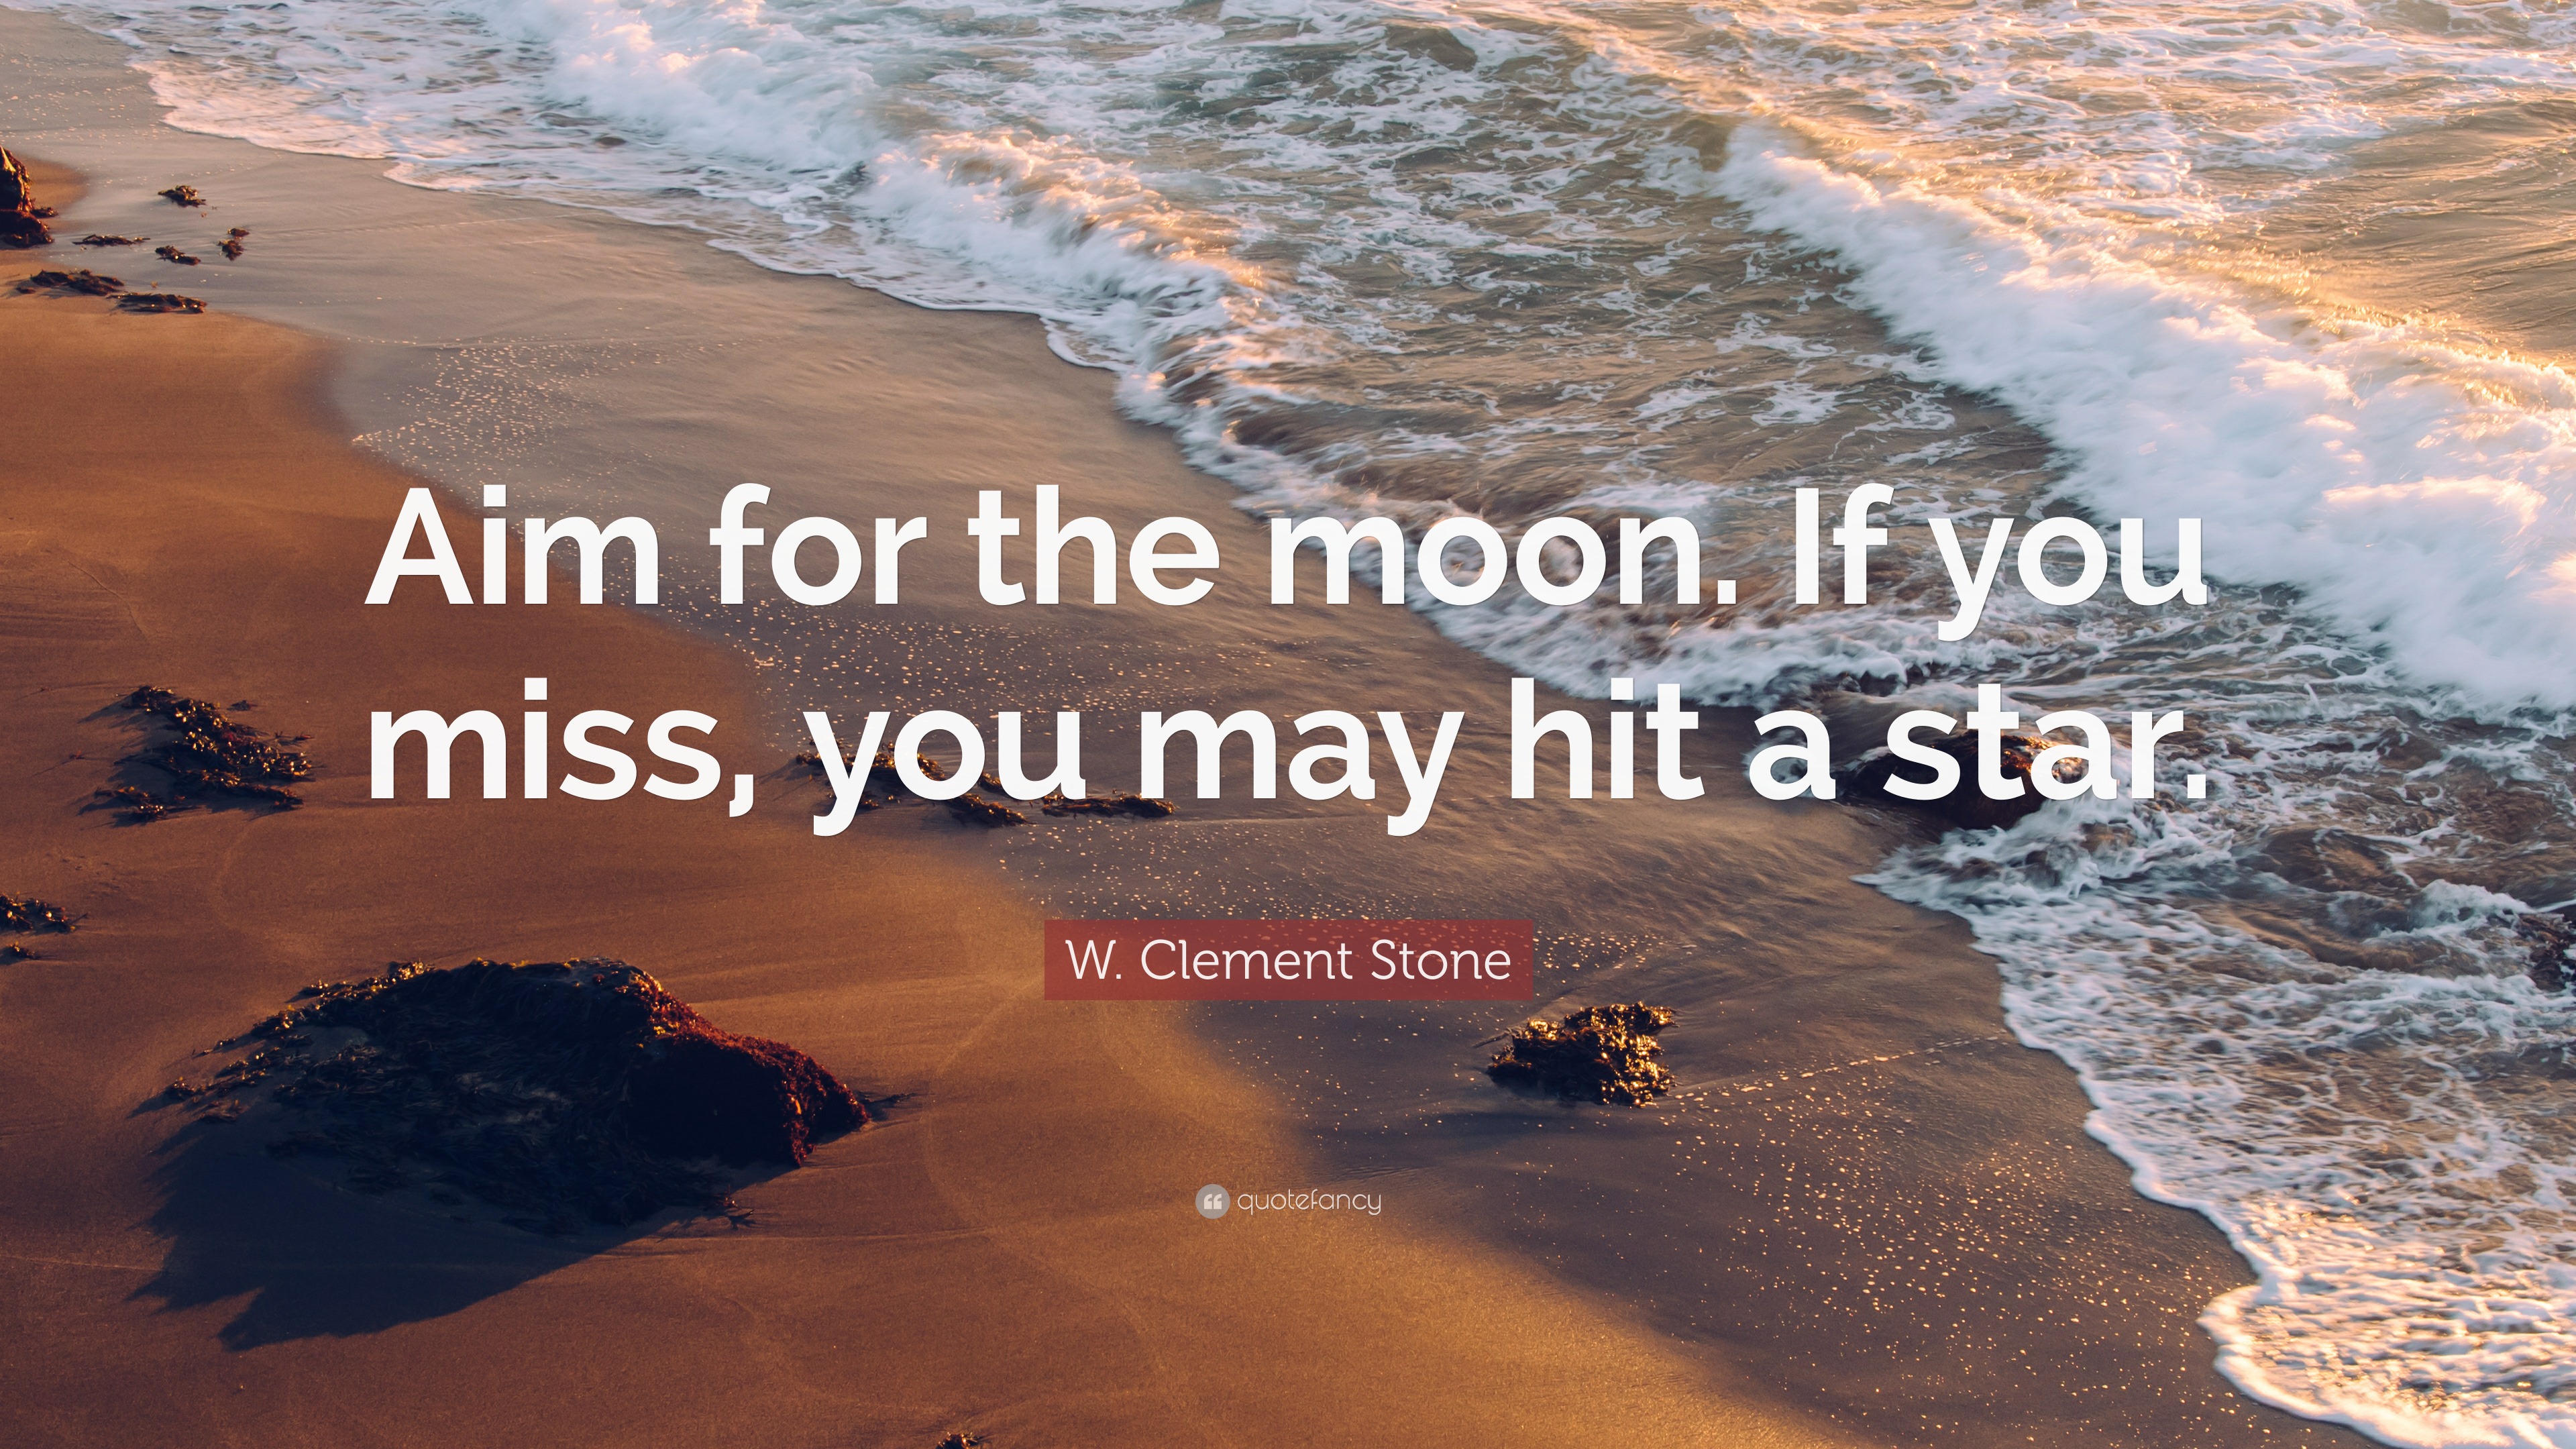 W. Clement Stone Quote: “Aim for the moon. If you miss, you may hit a